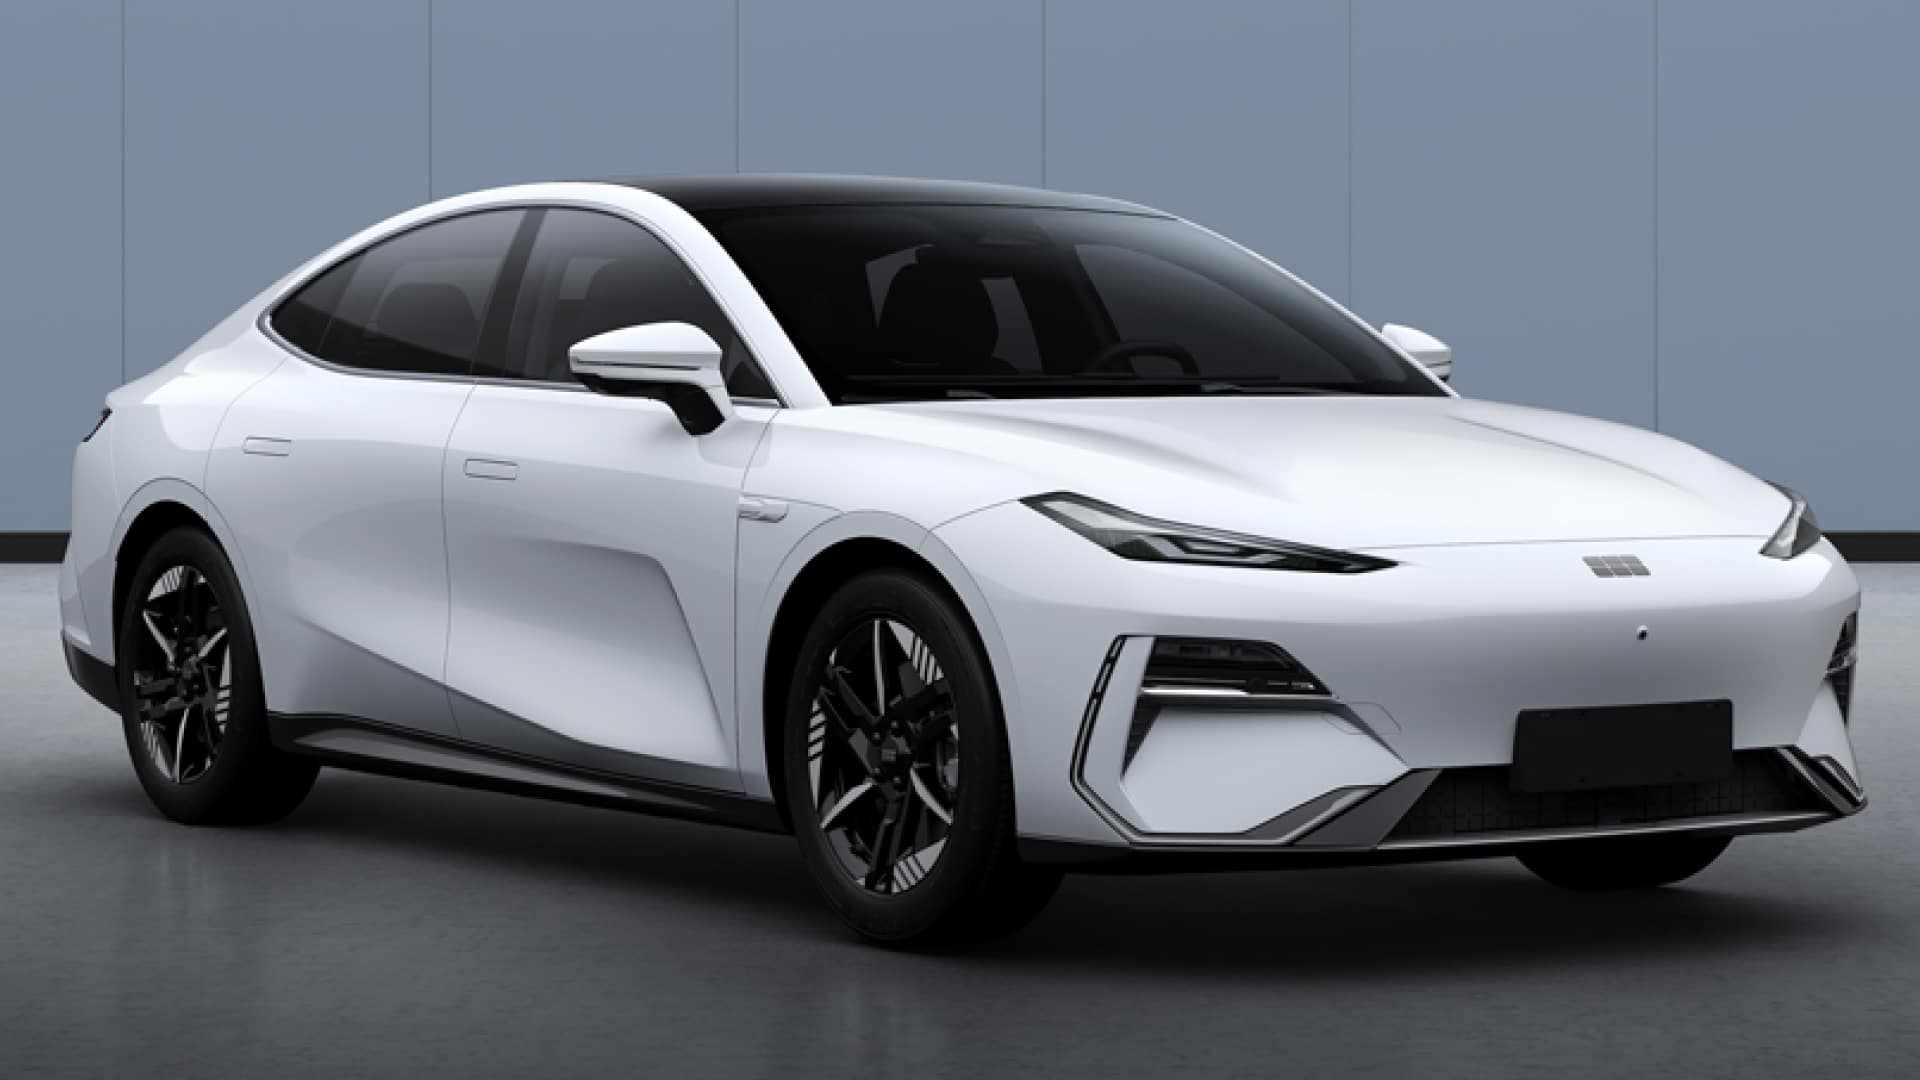 Geely Galaxy E8 is a large 5-meter electric sedan for China